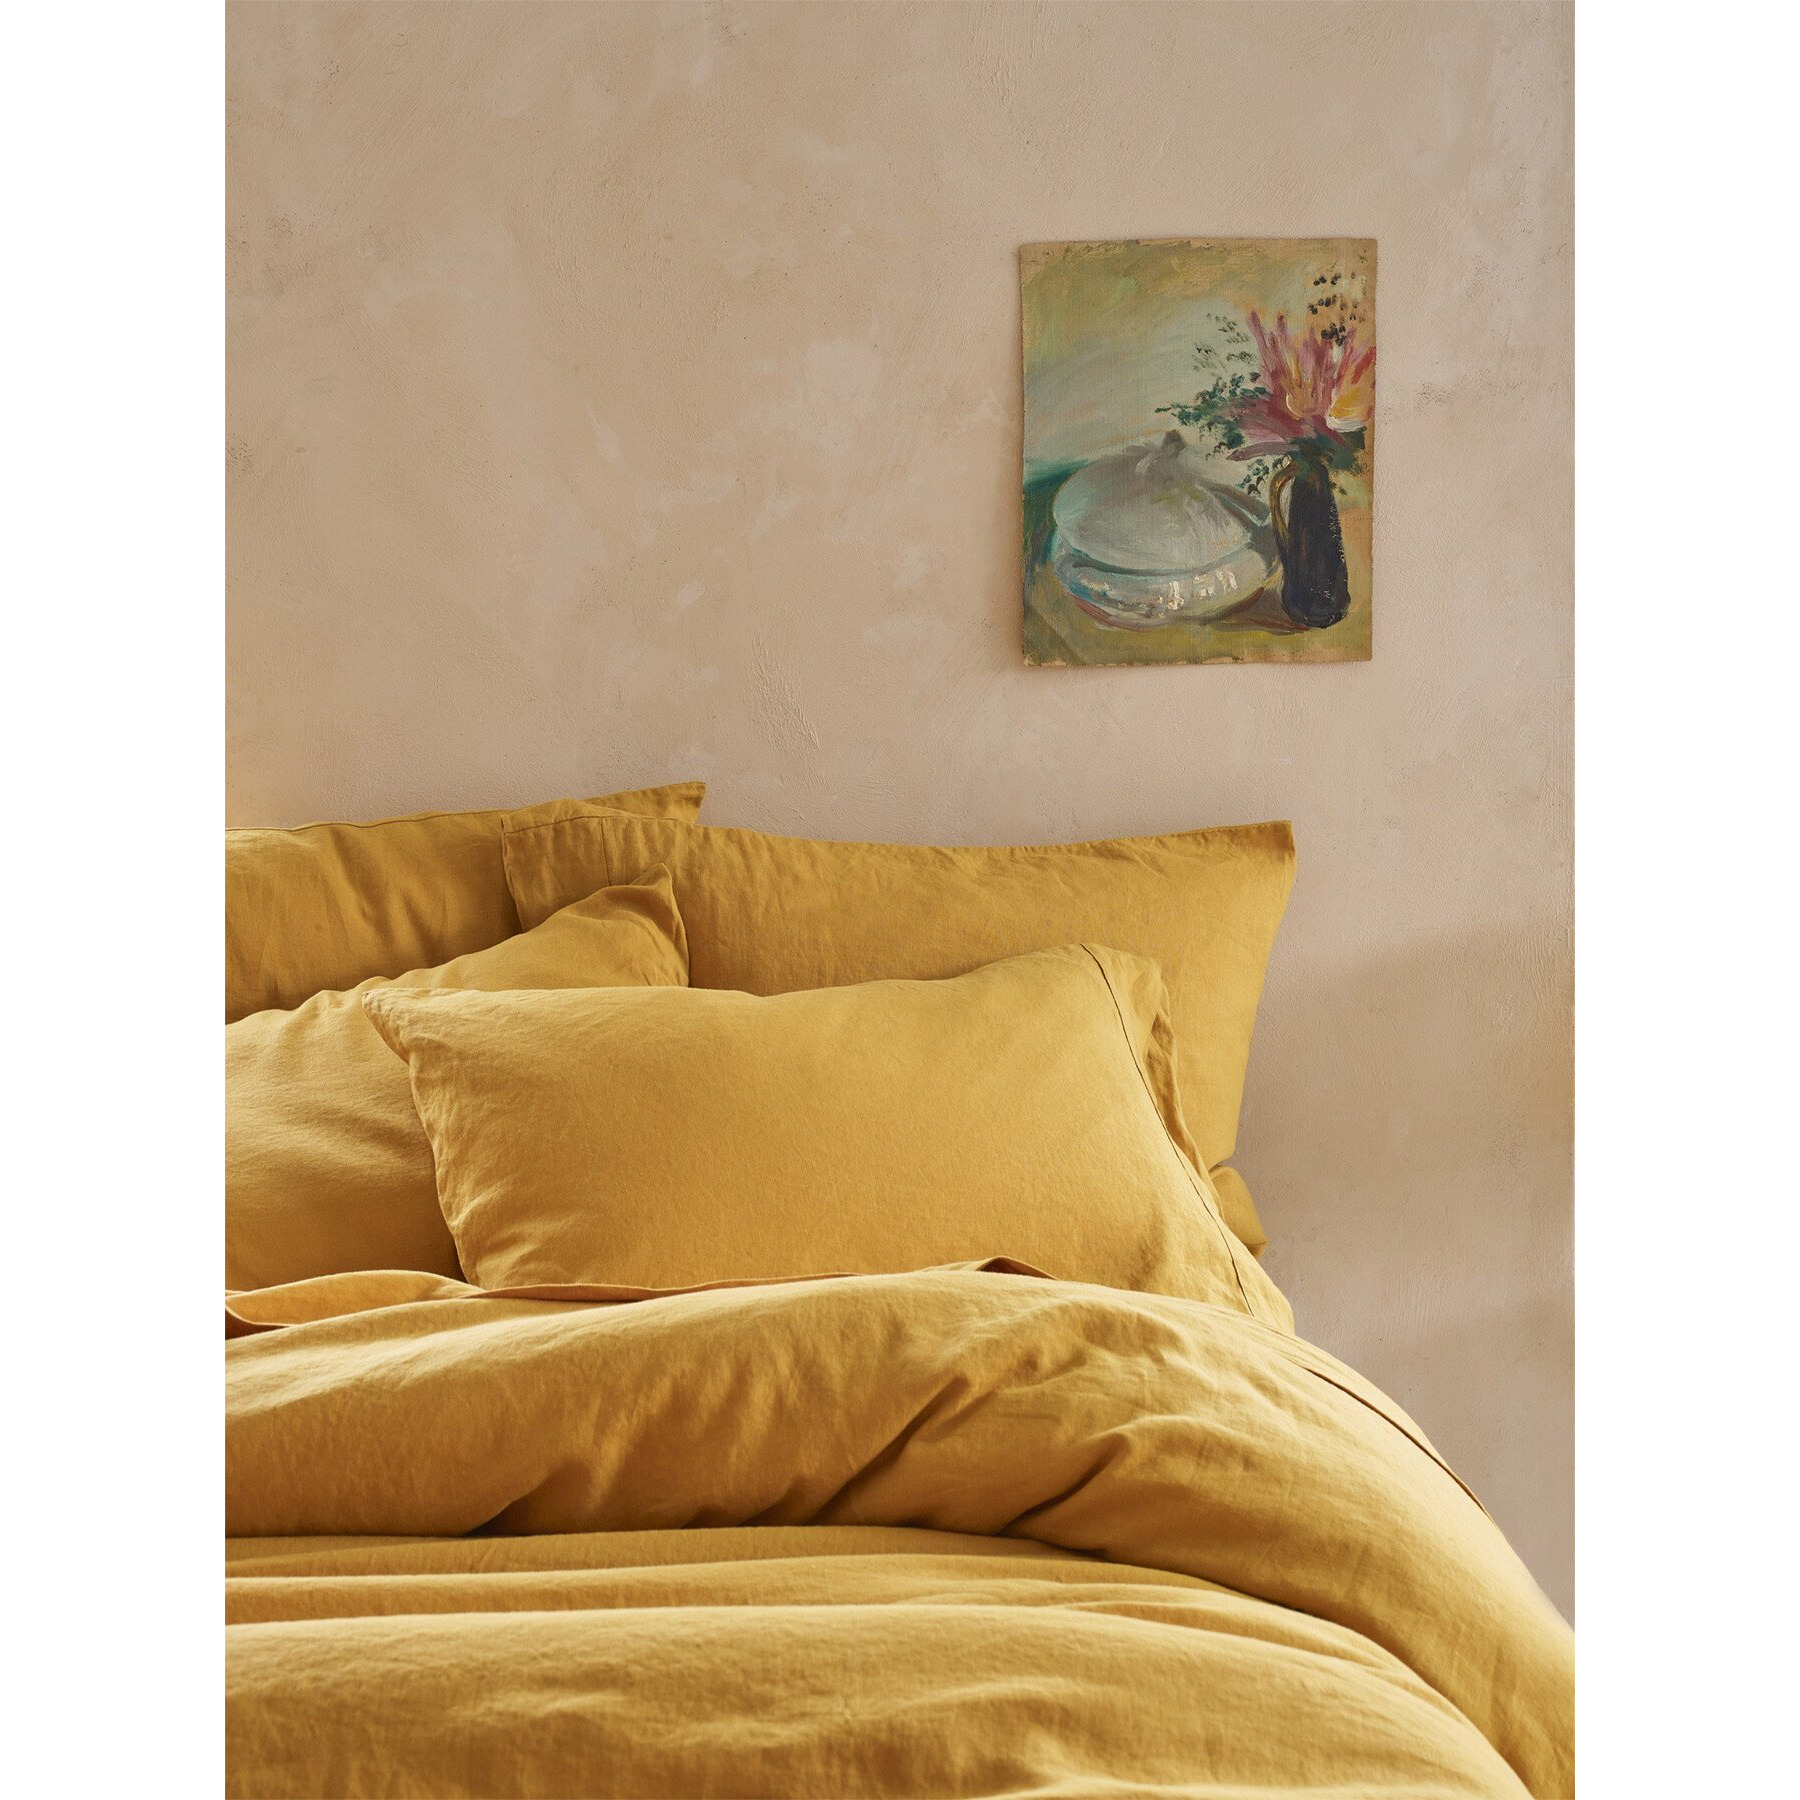 Piglet in Bed Linen Flat Sheet - Size Single Yellow - image 1